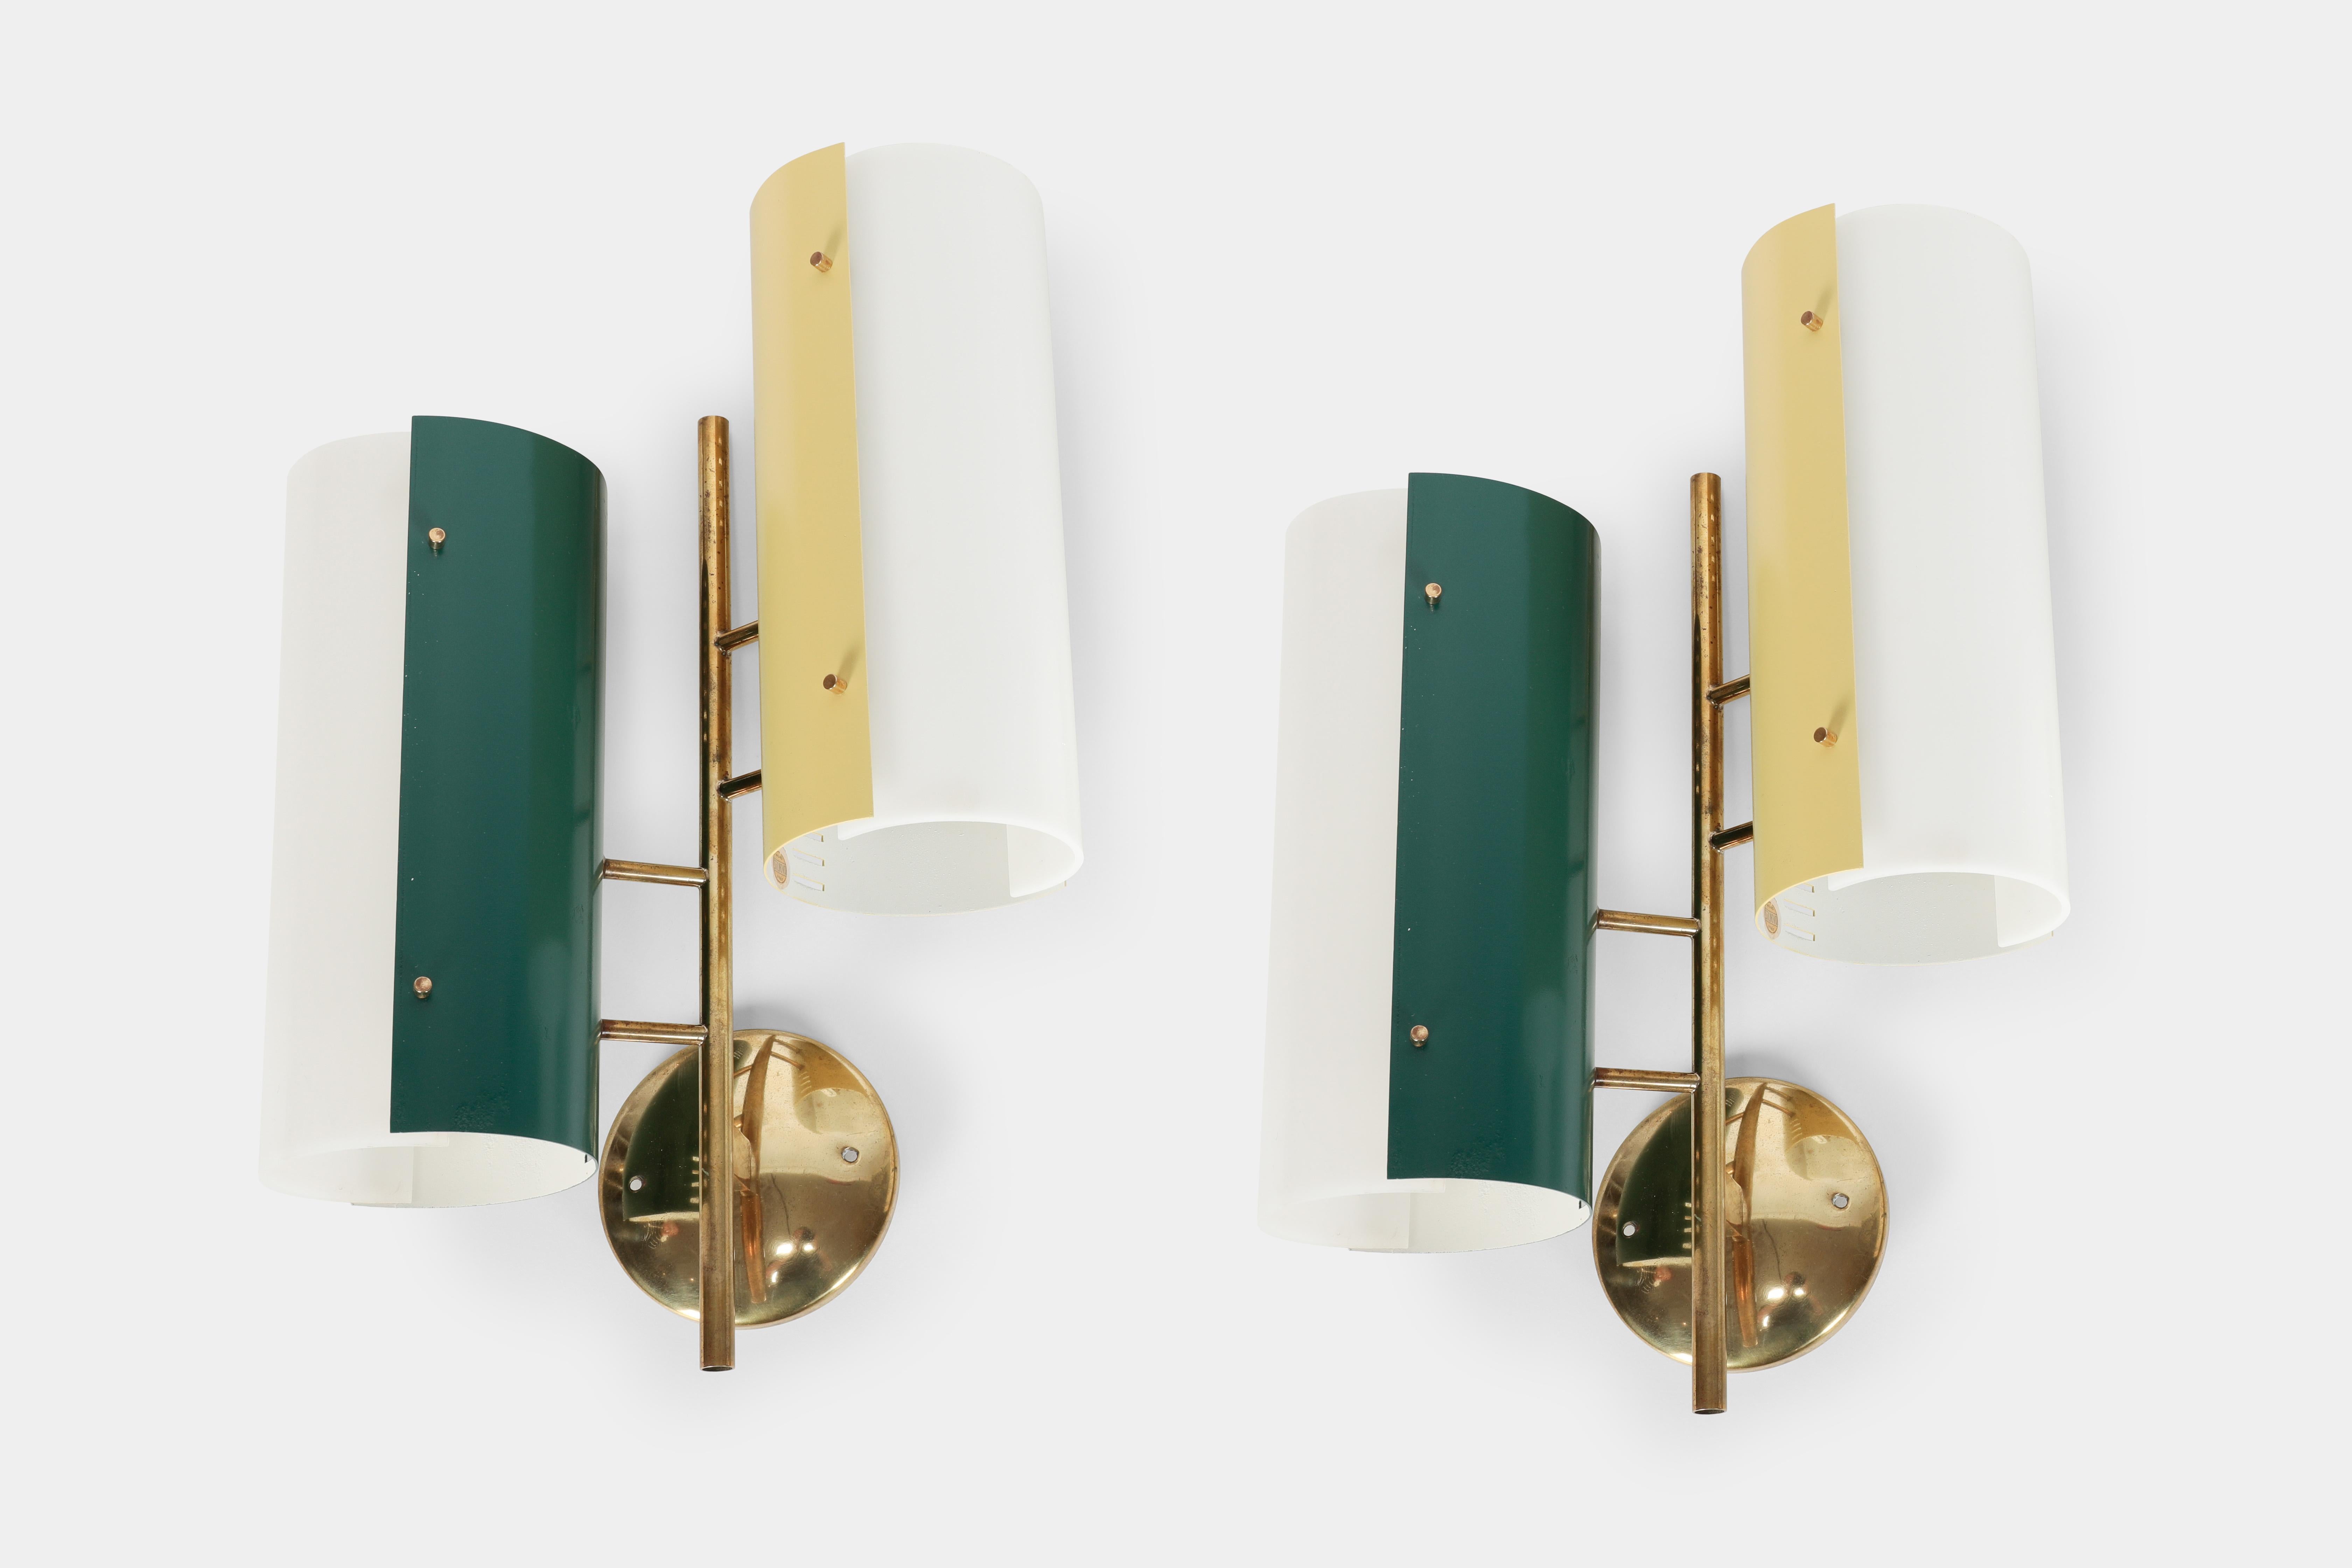 Wall lights manufactured by Stilnovo in the 1950s in Italy. Two wall lights with a solid brass base. Attached to the base are two cylindrical light bodies made of colored lacquered aluminum and perspex.